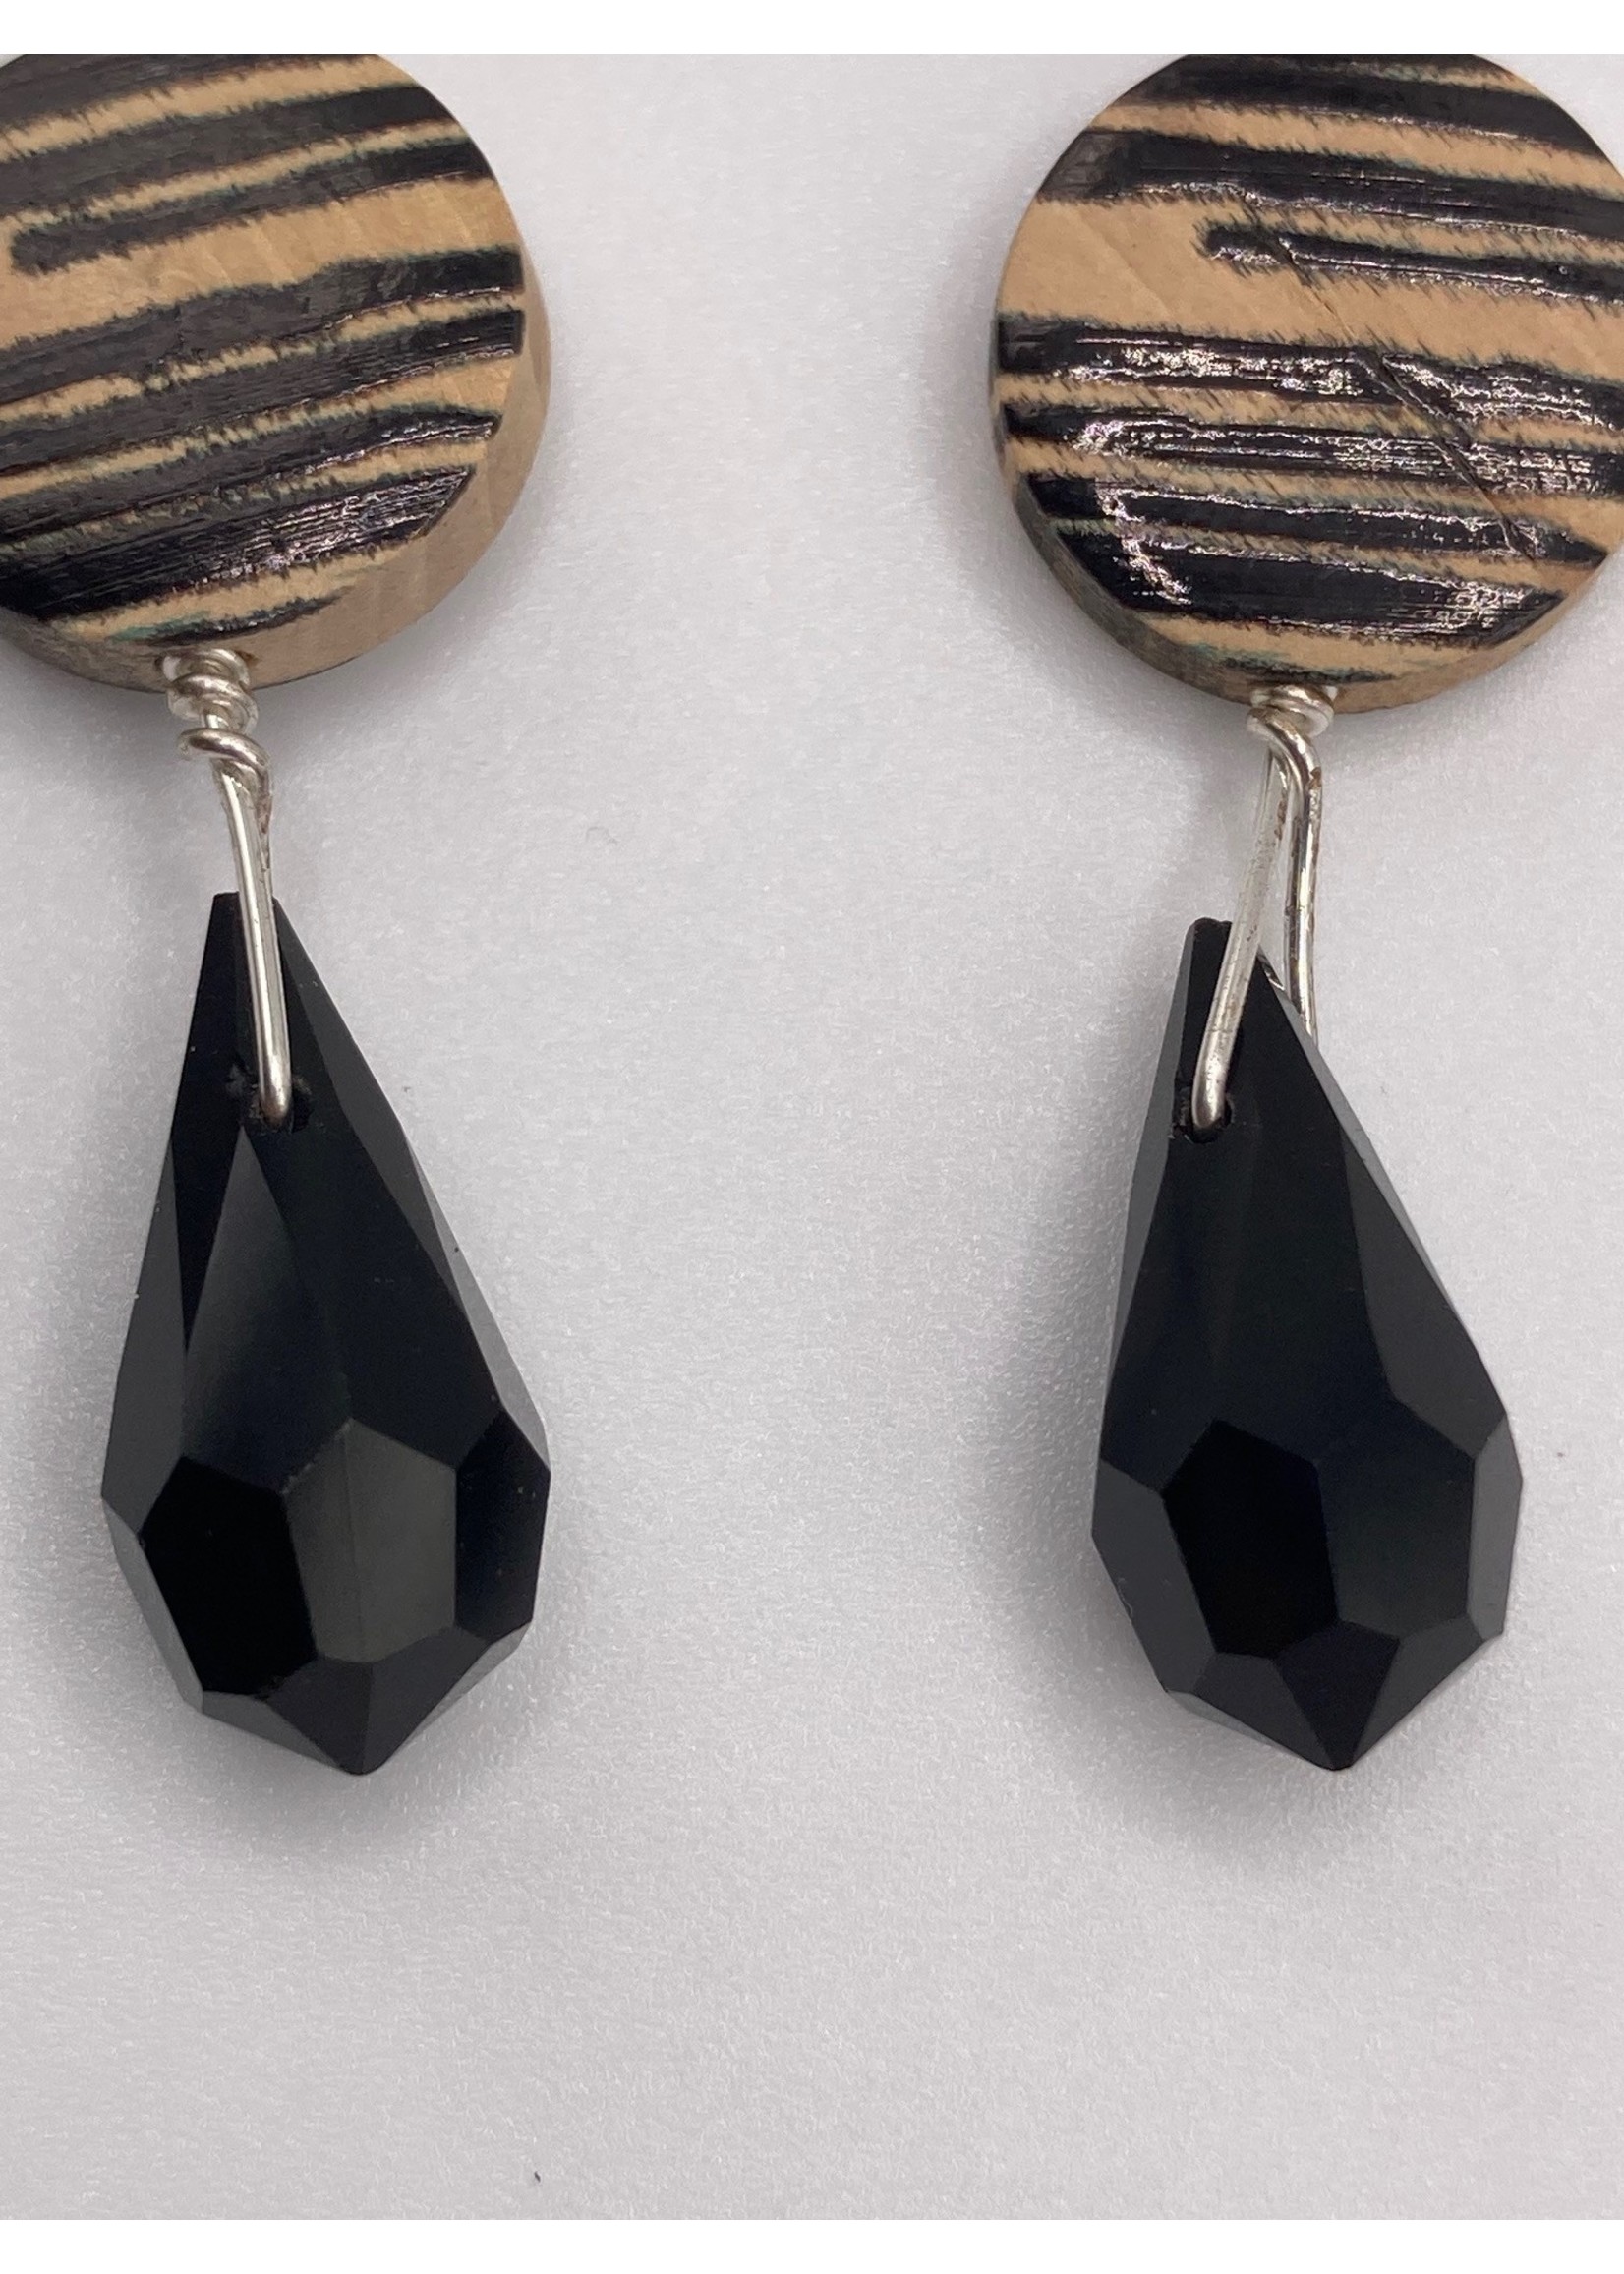 Our Twisted Dahlia Black and Tan Wood Coin with Black Crystal Earrings